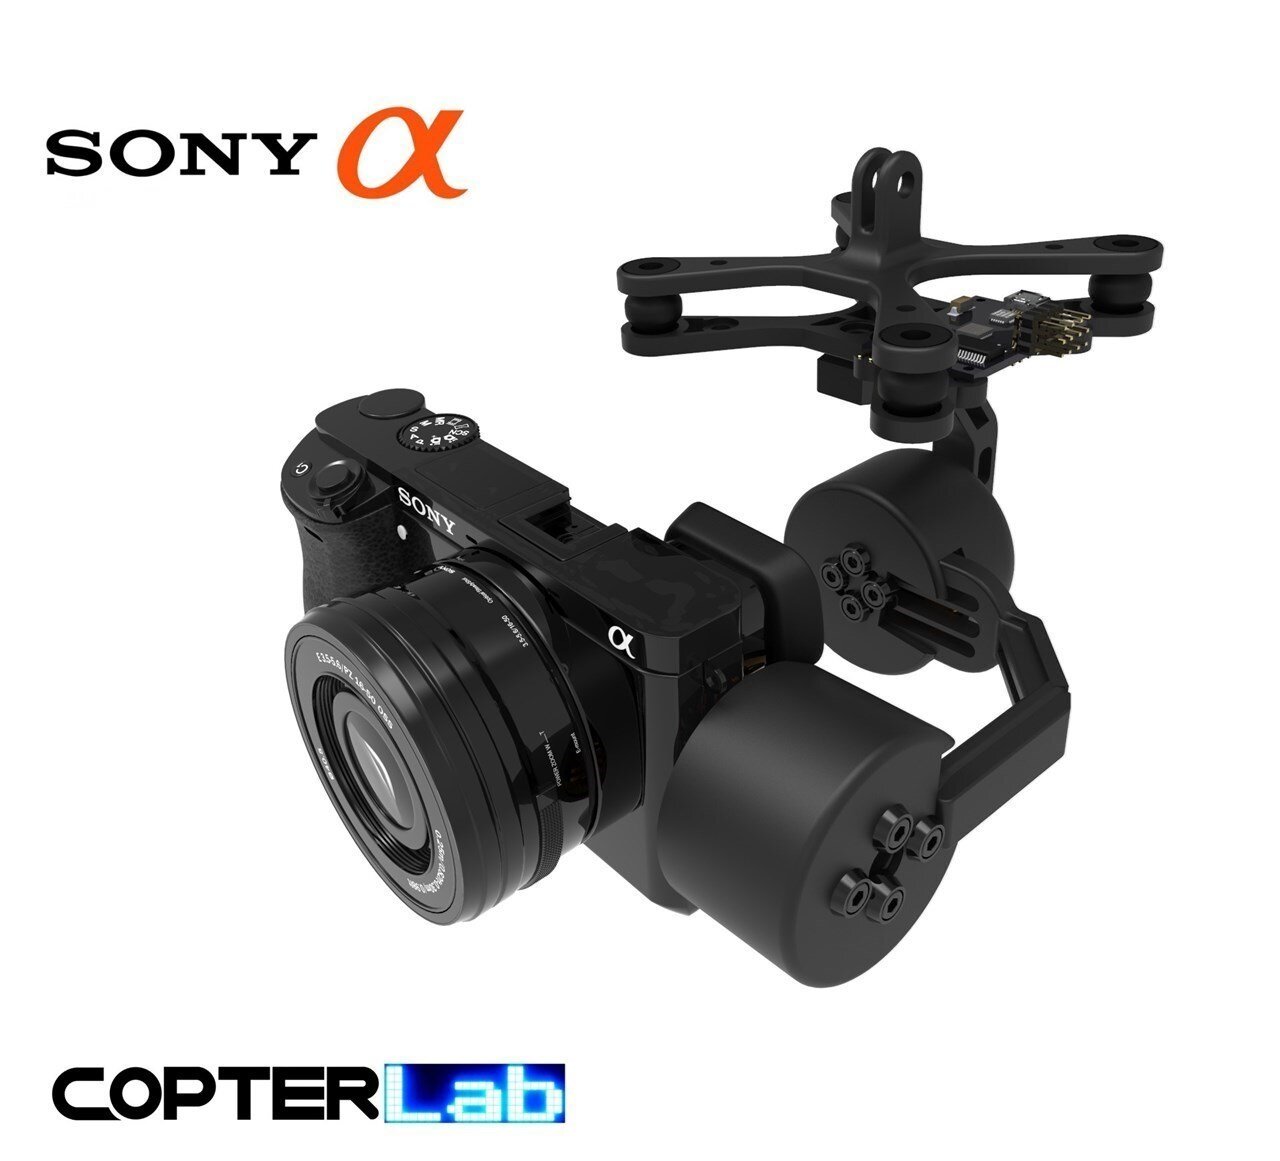 Drone Gimbals, Drone Camera Stabilisers